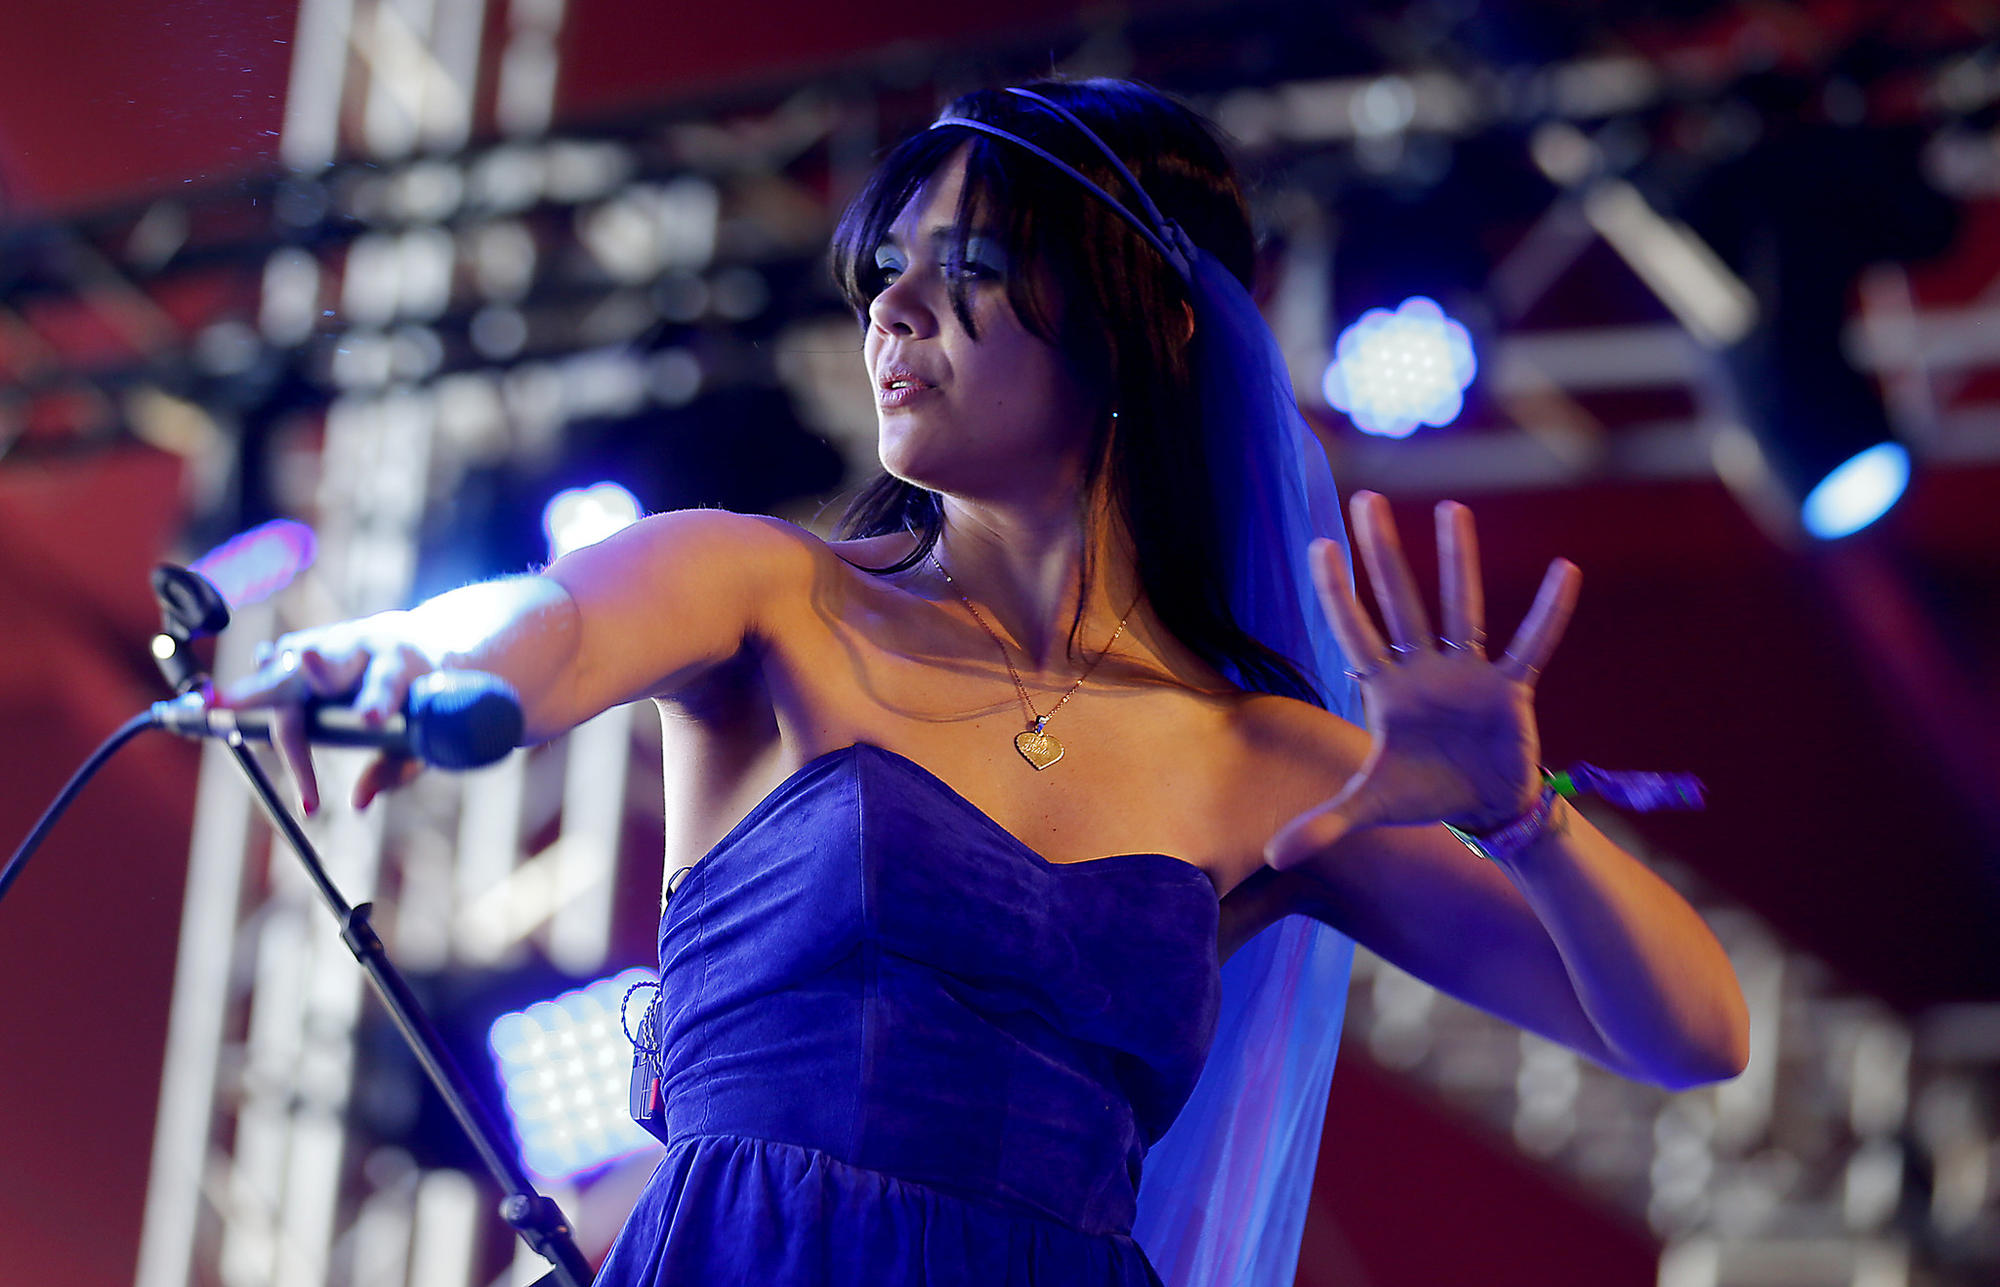 Bat for Lashes performs at the Coachella Music and Arts Festival in on April 16.